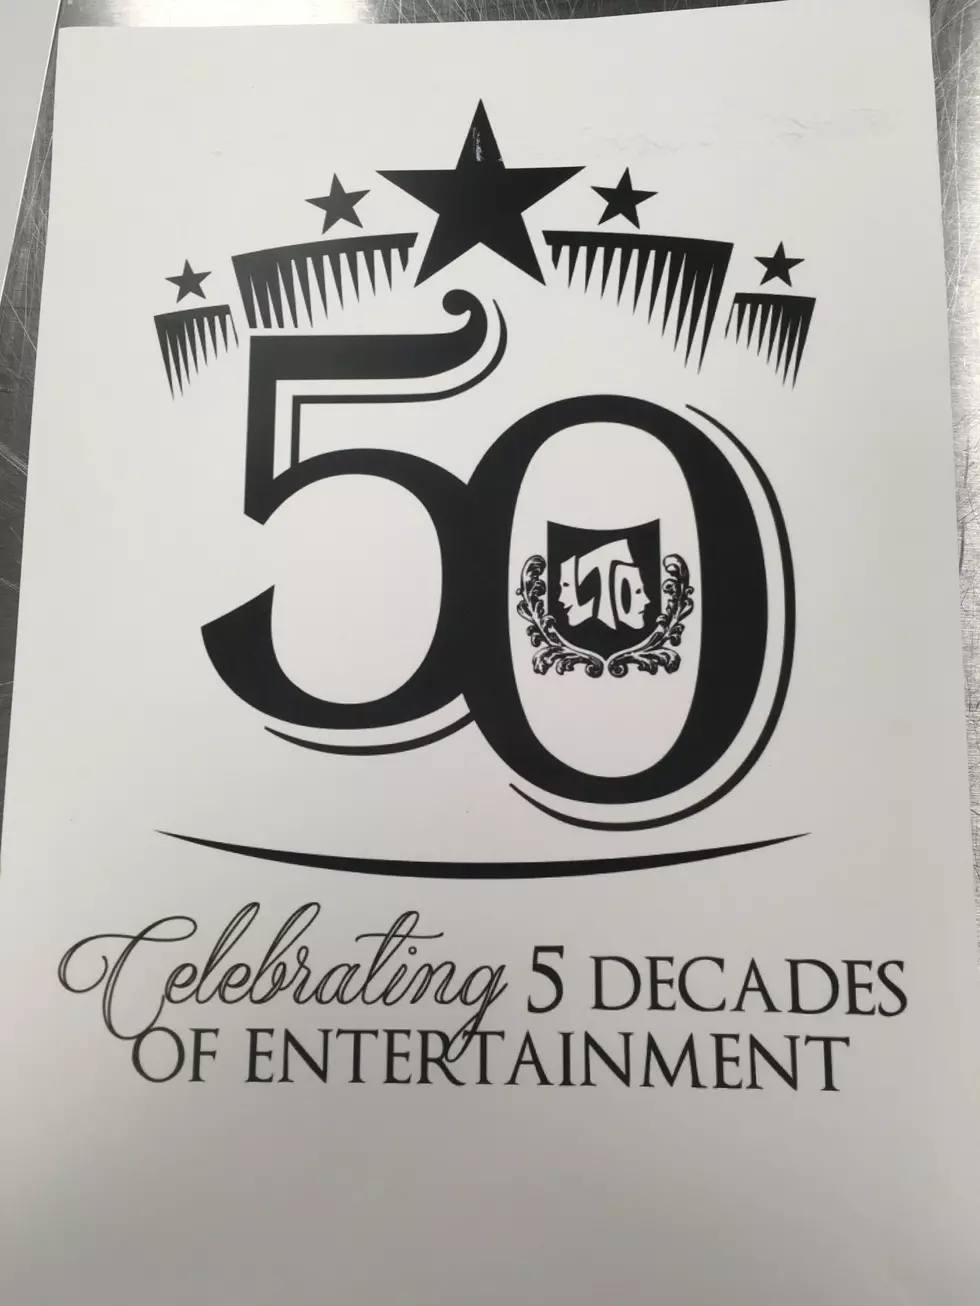 A Look Back: 50 Years of Little Theatre of Owatonna, Steele County